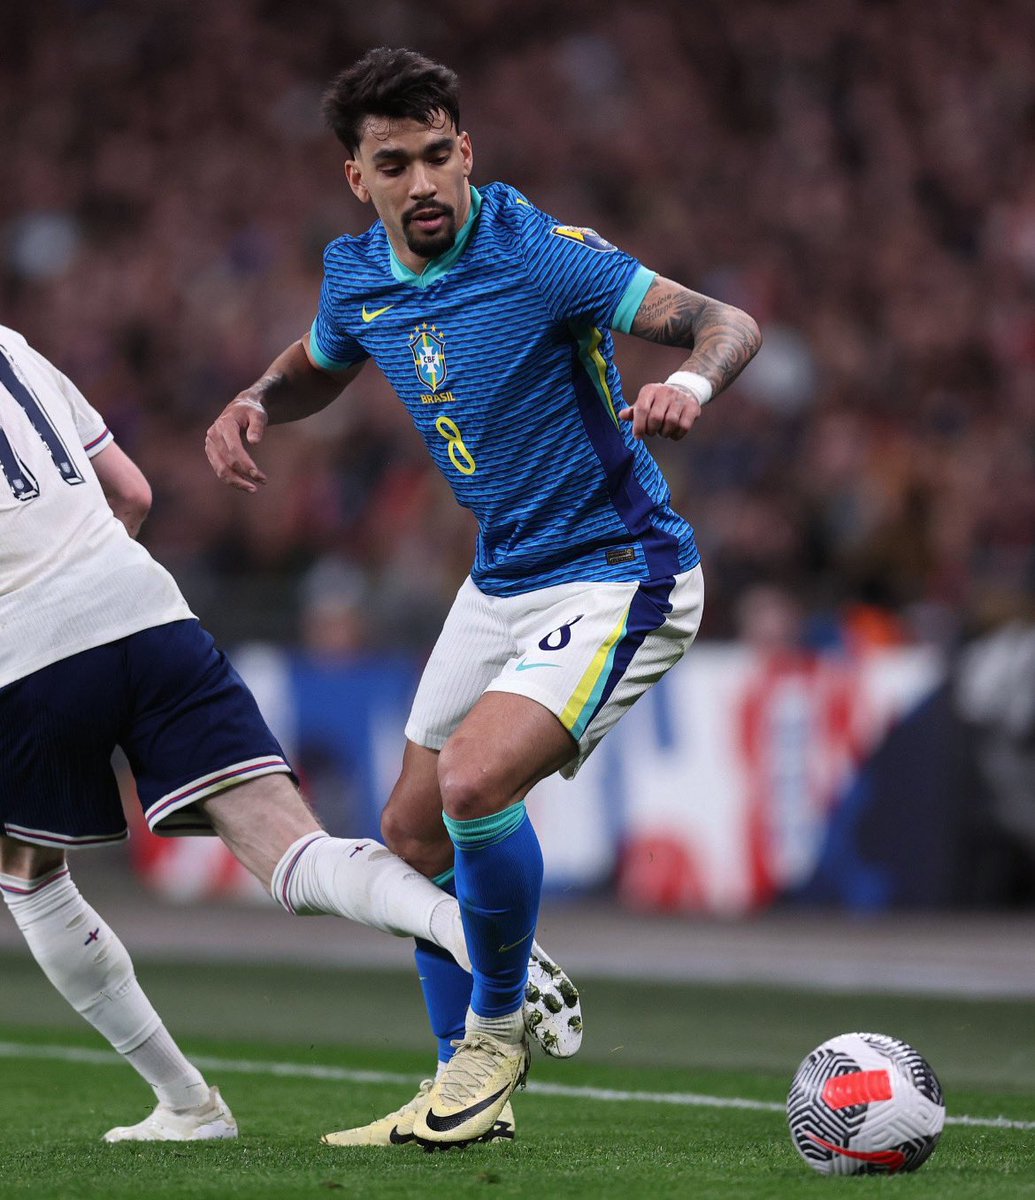 Lucas Paquetá’s first half [ RANK] v England: 🥇 [1st] Most dribbles completed (2) 🥇 [1st] Most chances created (3) 🥇 [1st] Highest pass accuracy (92%) + 100% Aerial duels won, 100% Dribble success Dancing around Wembley. 🕺🏽🇧🇷